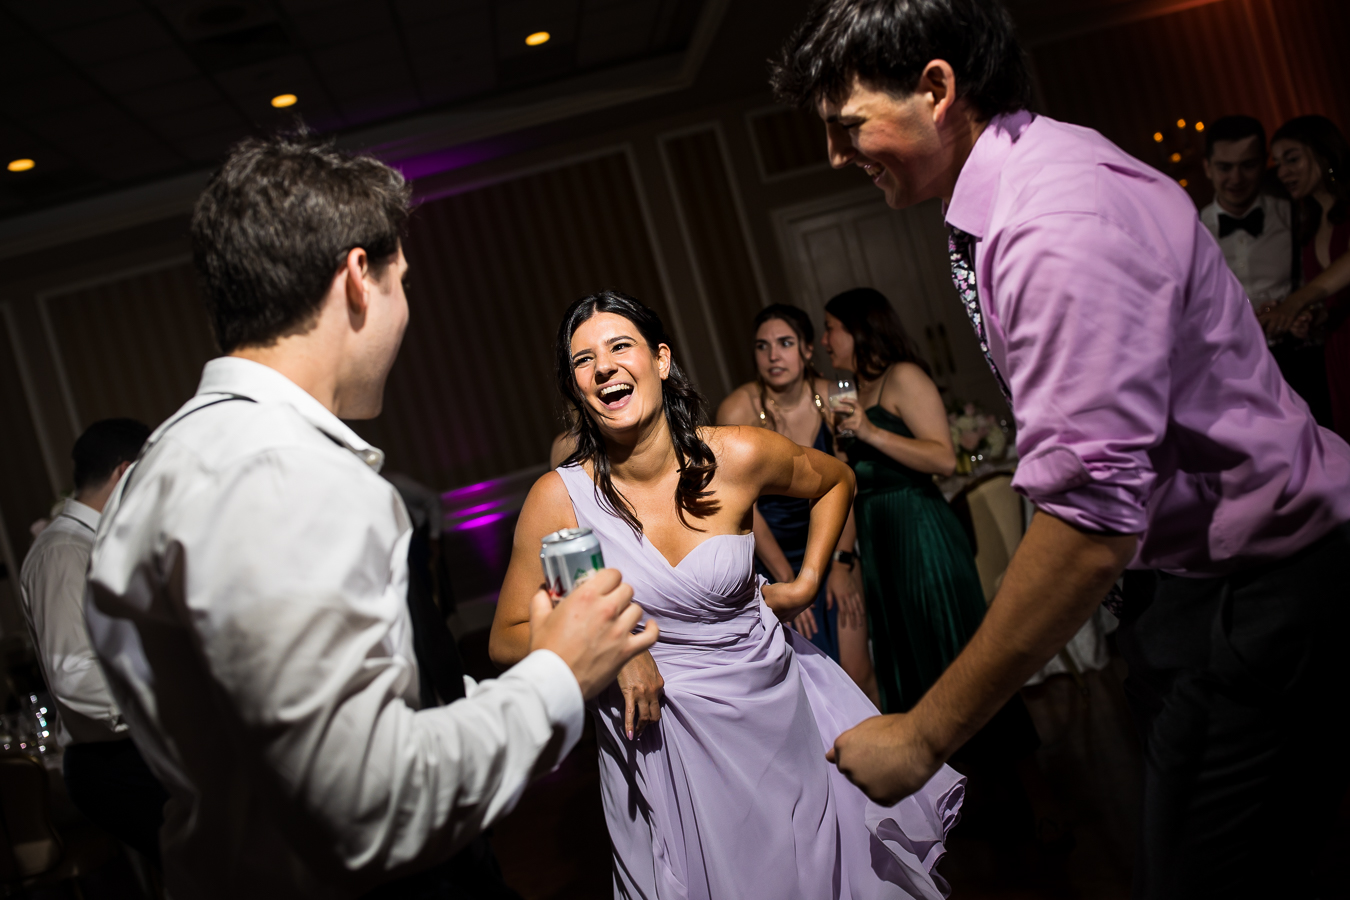 image of the wedding party dancing together at this pa wedding reception